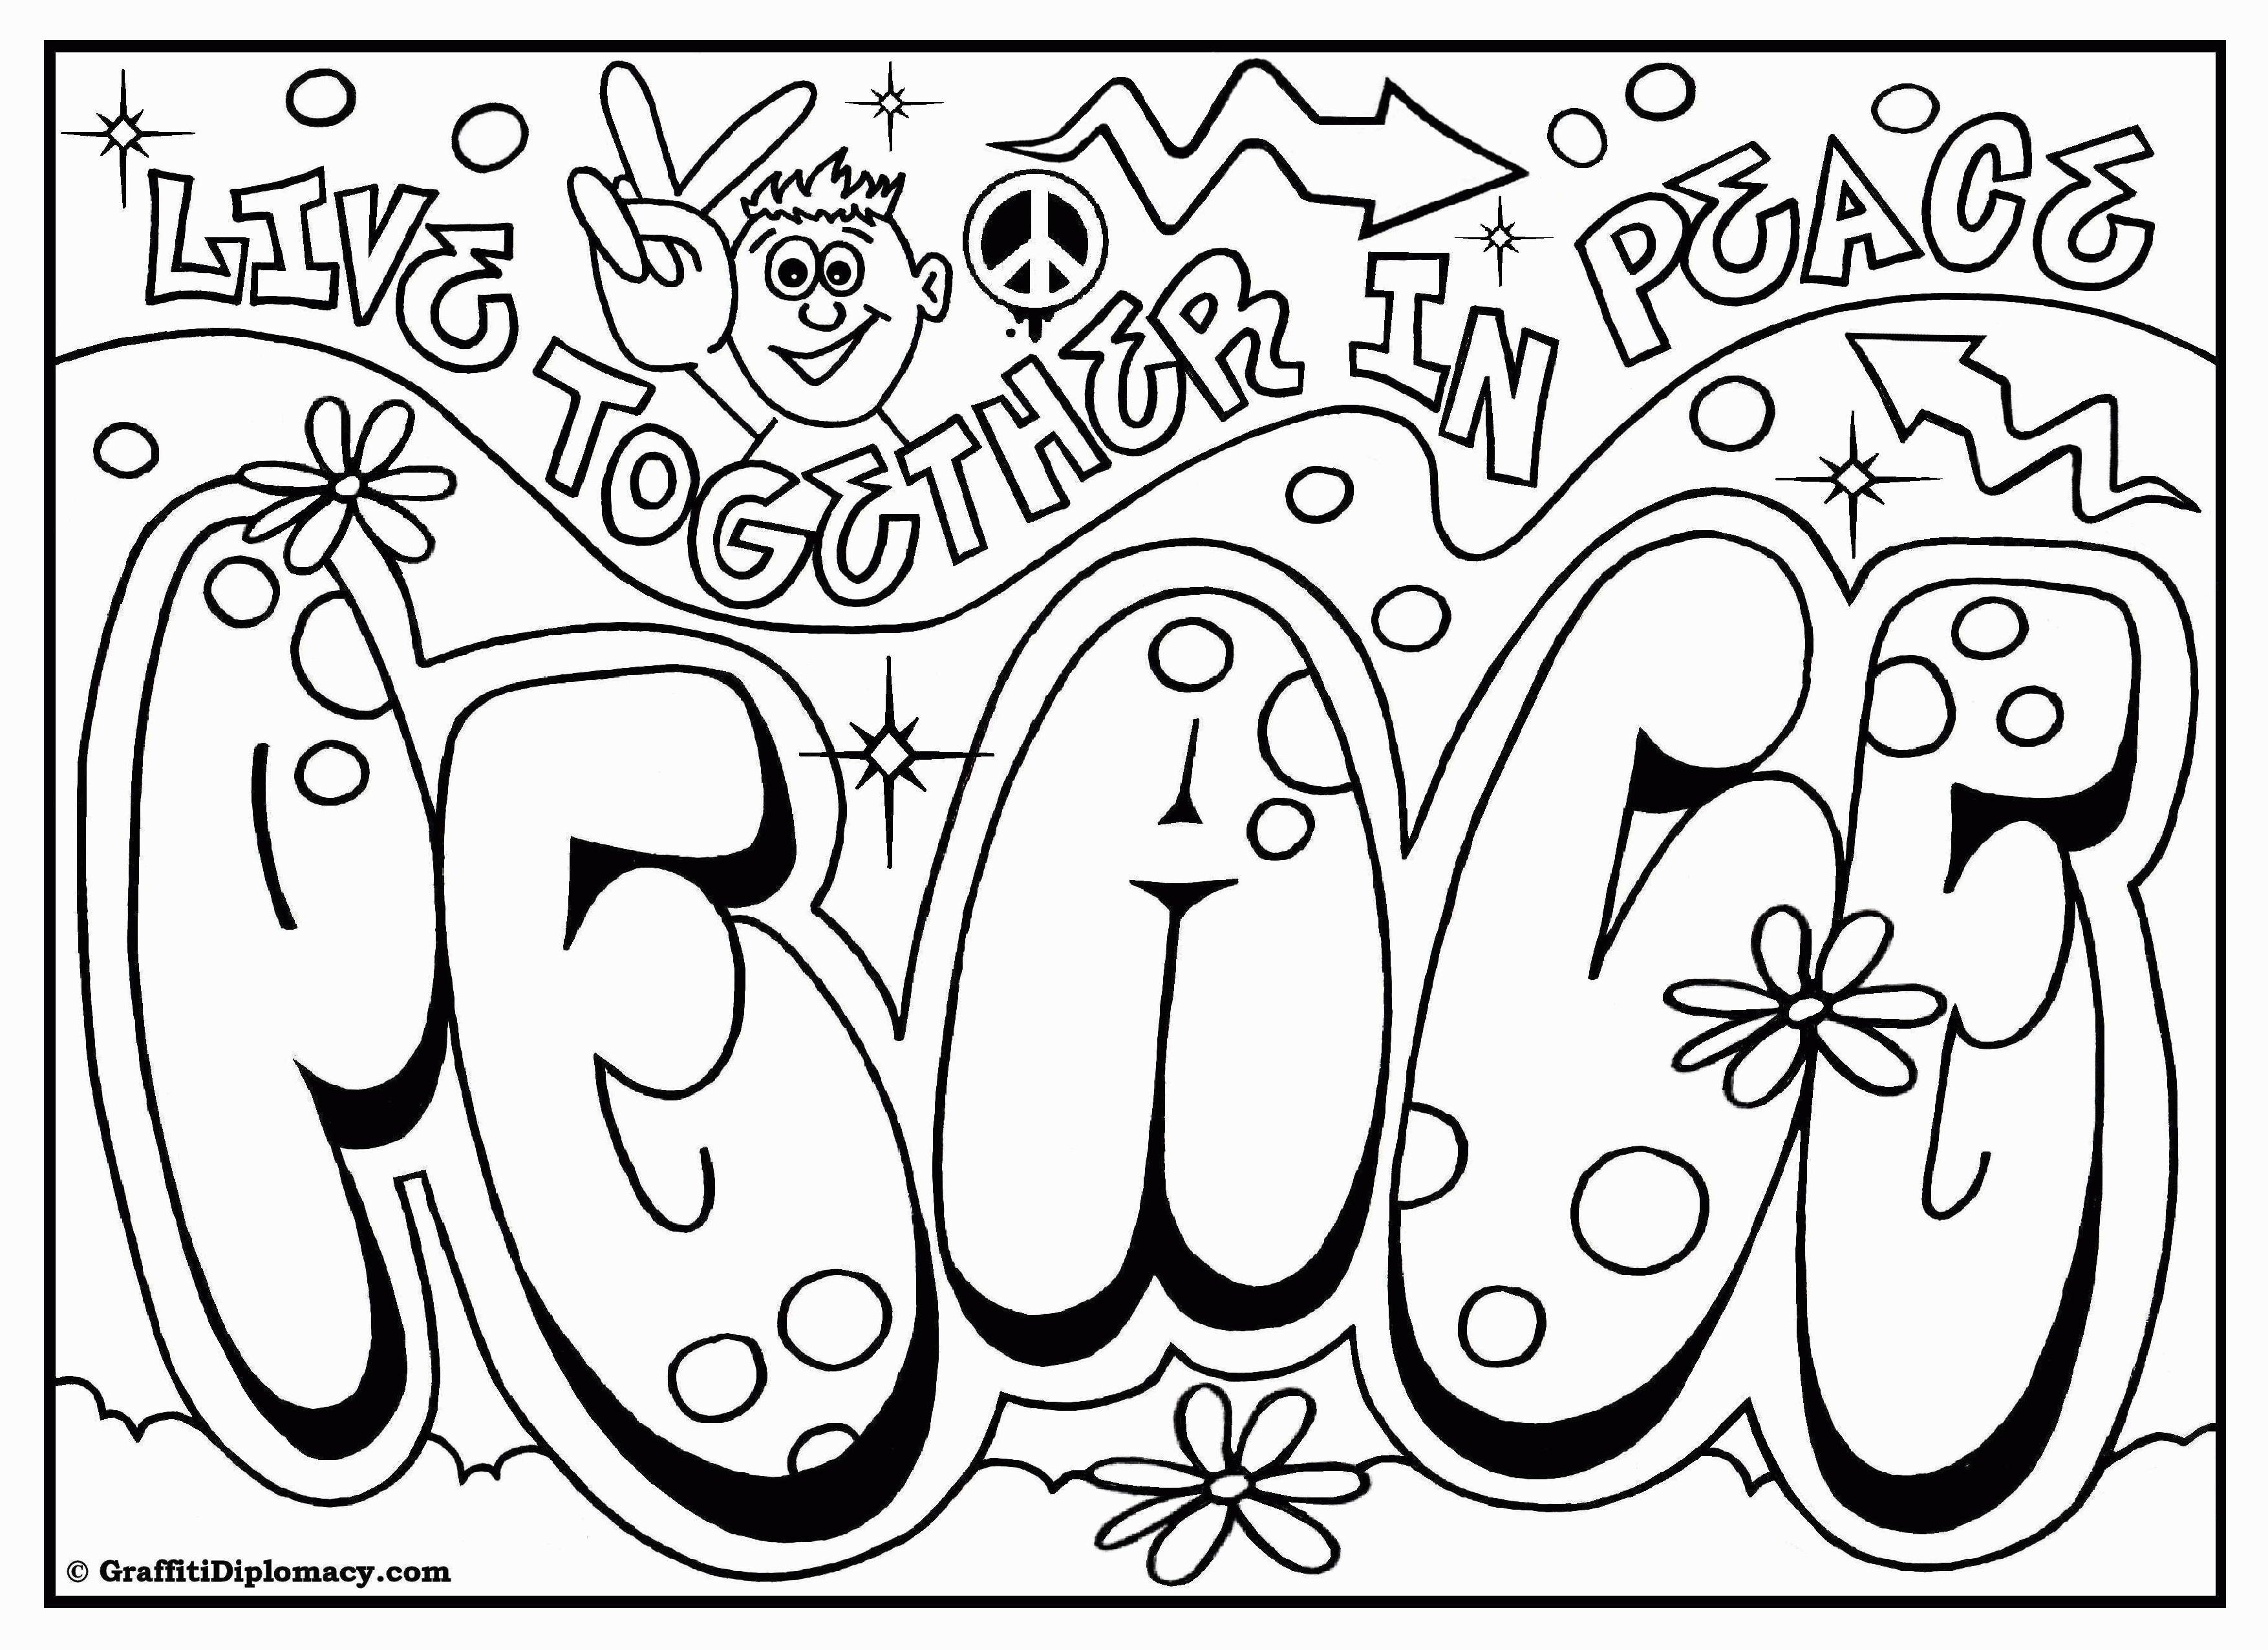 OMG! Another Graffiti Coloring Book of Room Signs - Learn to draw ...